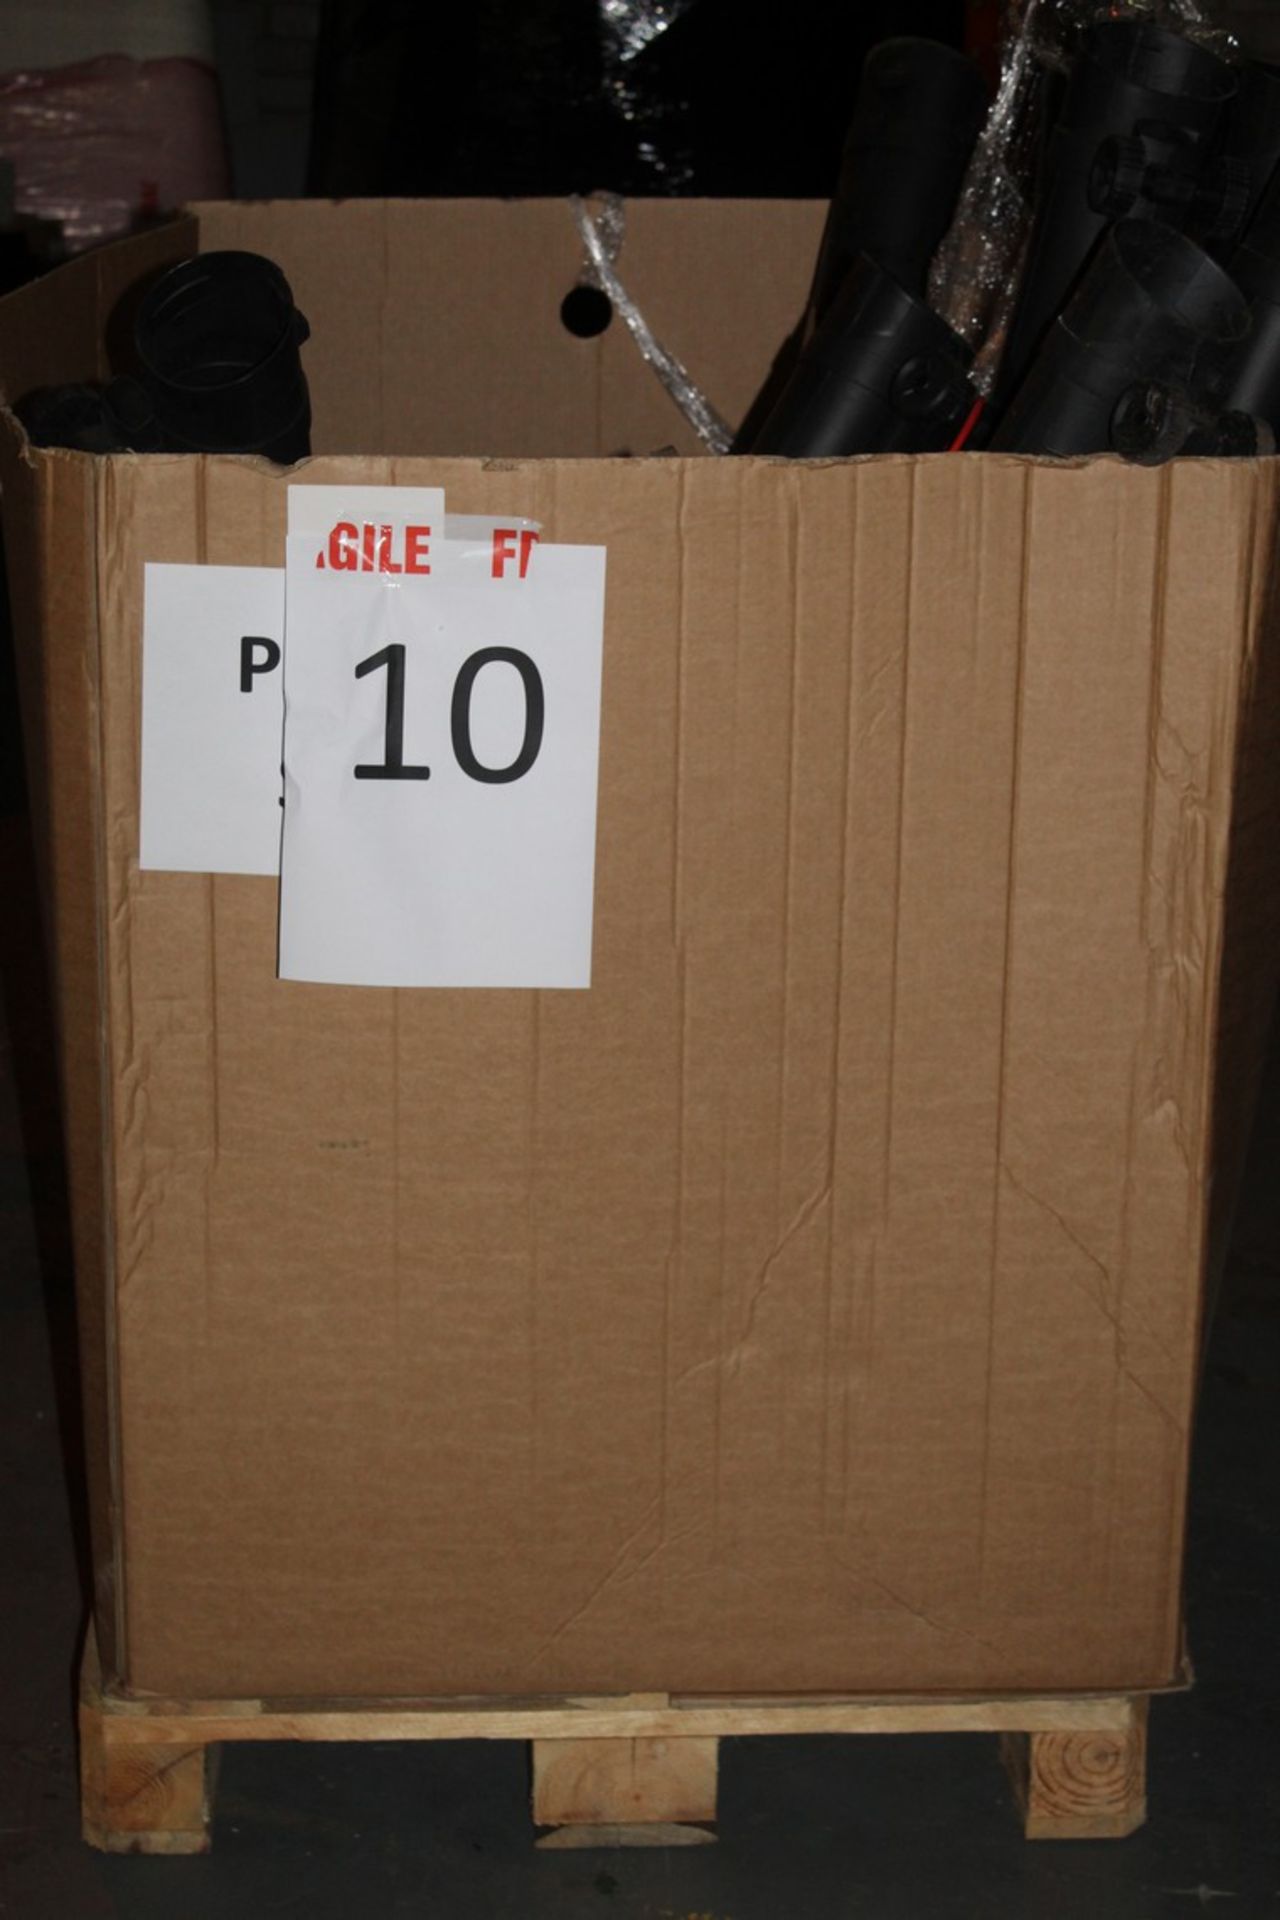 Pallet to Contain 9 Assorted Unboxed Ferrex Leaf B